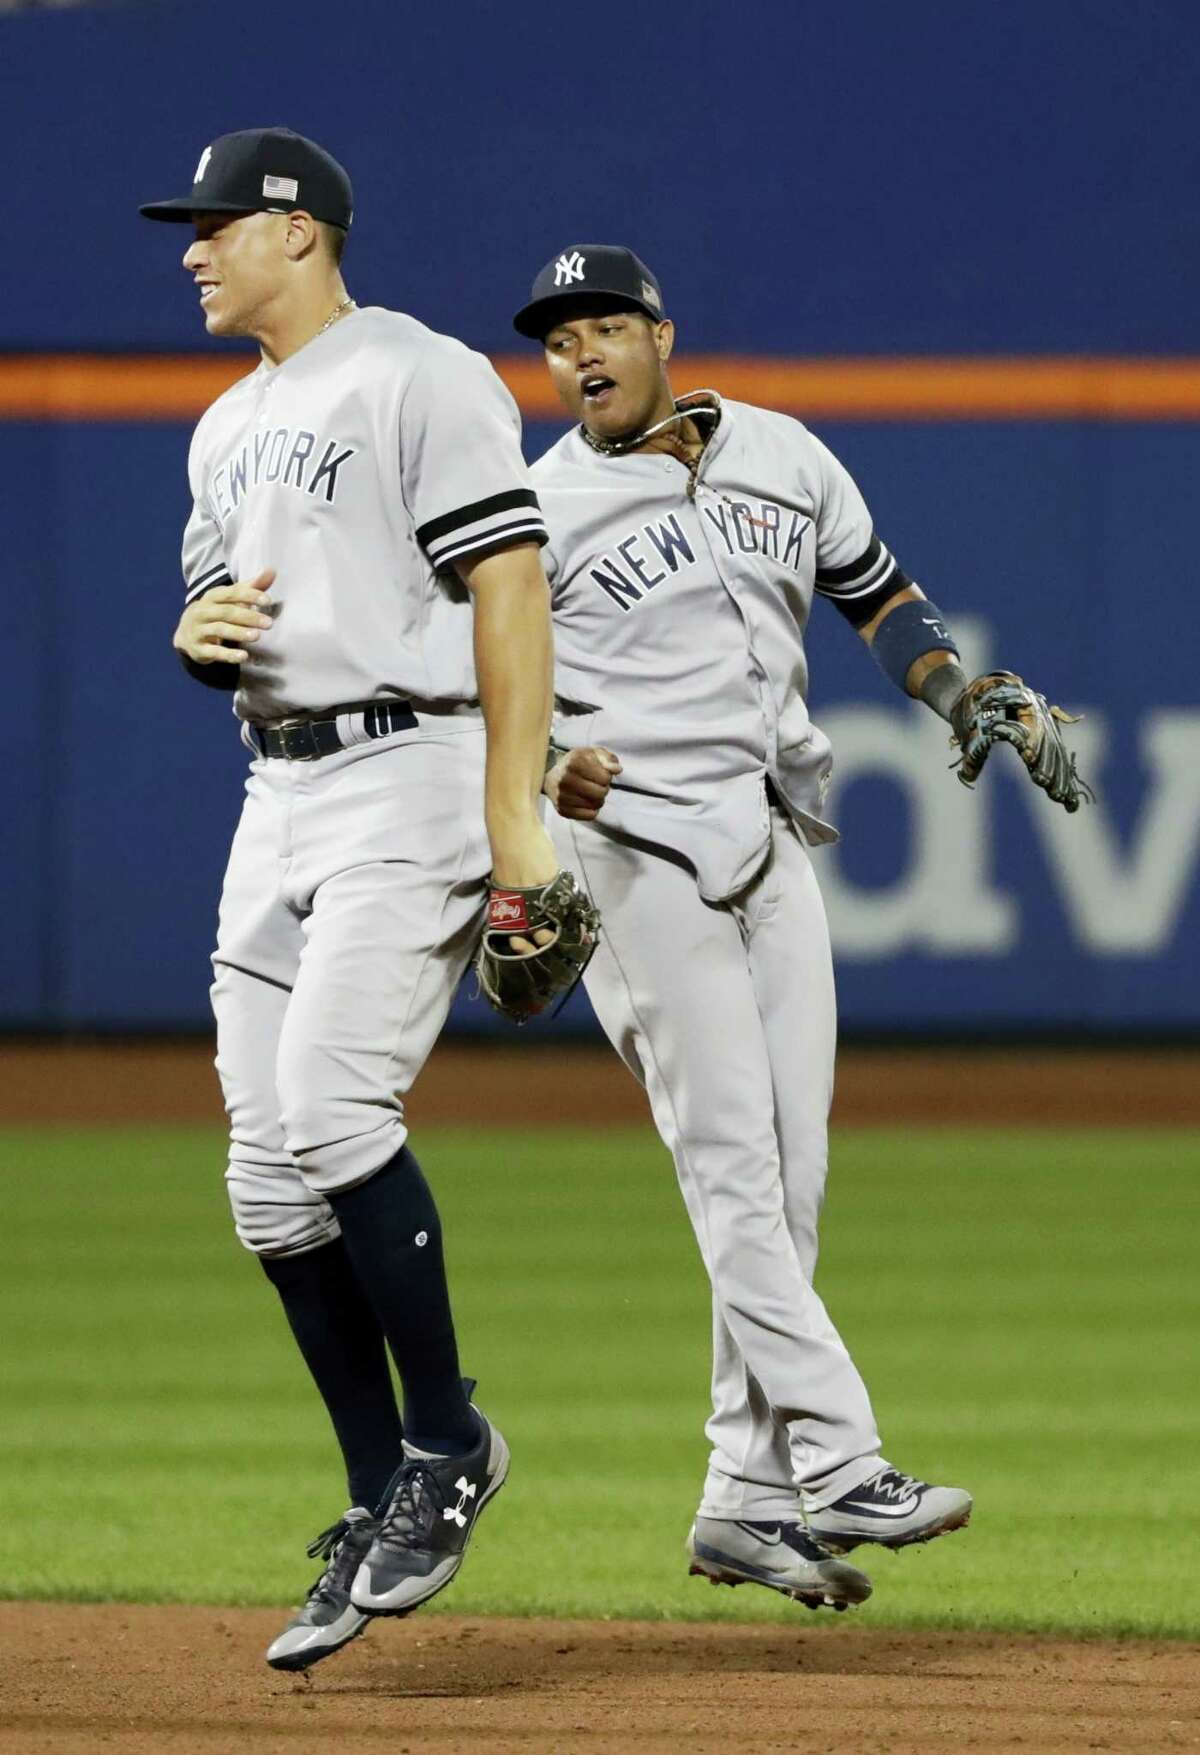 Yankees right at Home in road win over Rays at Citi Field